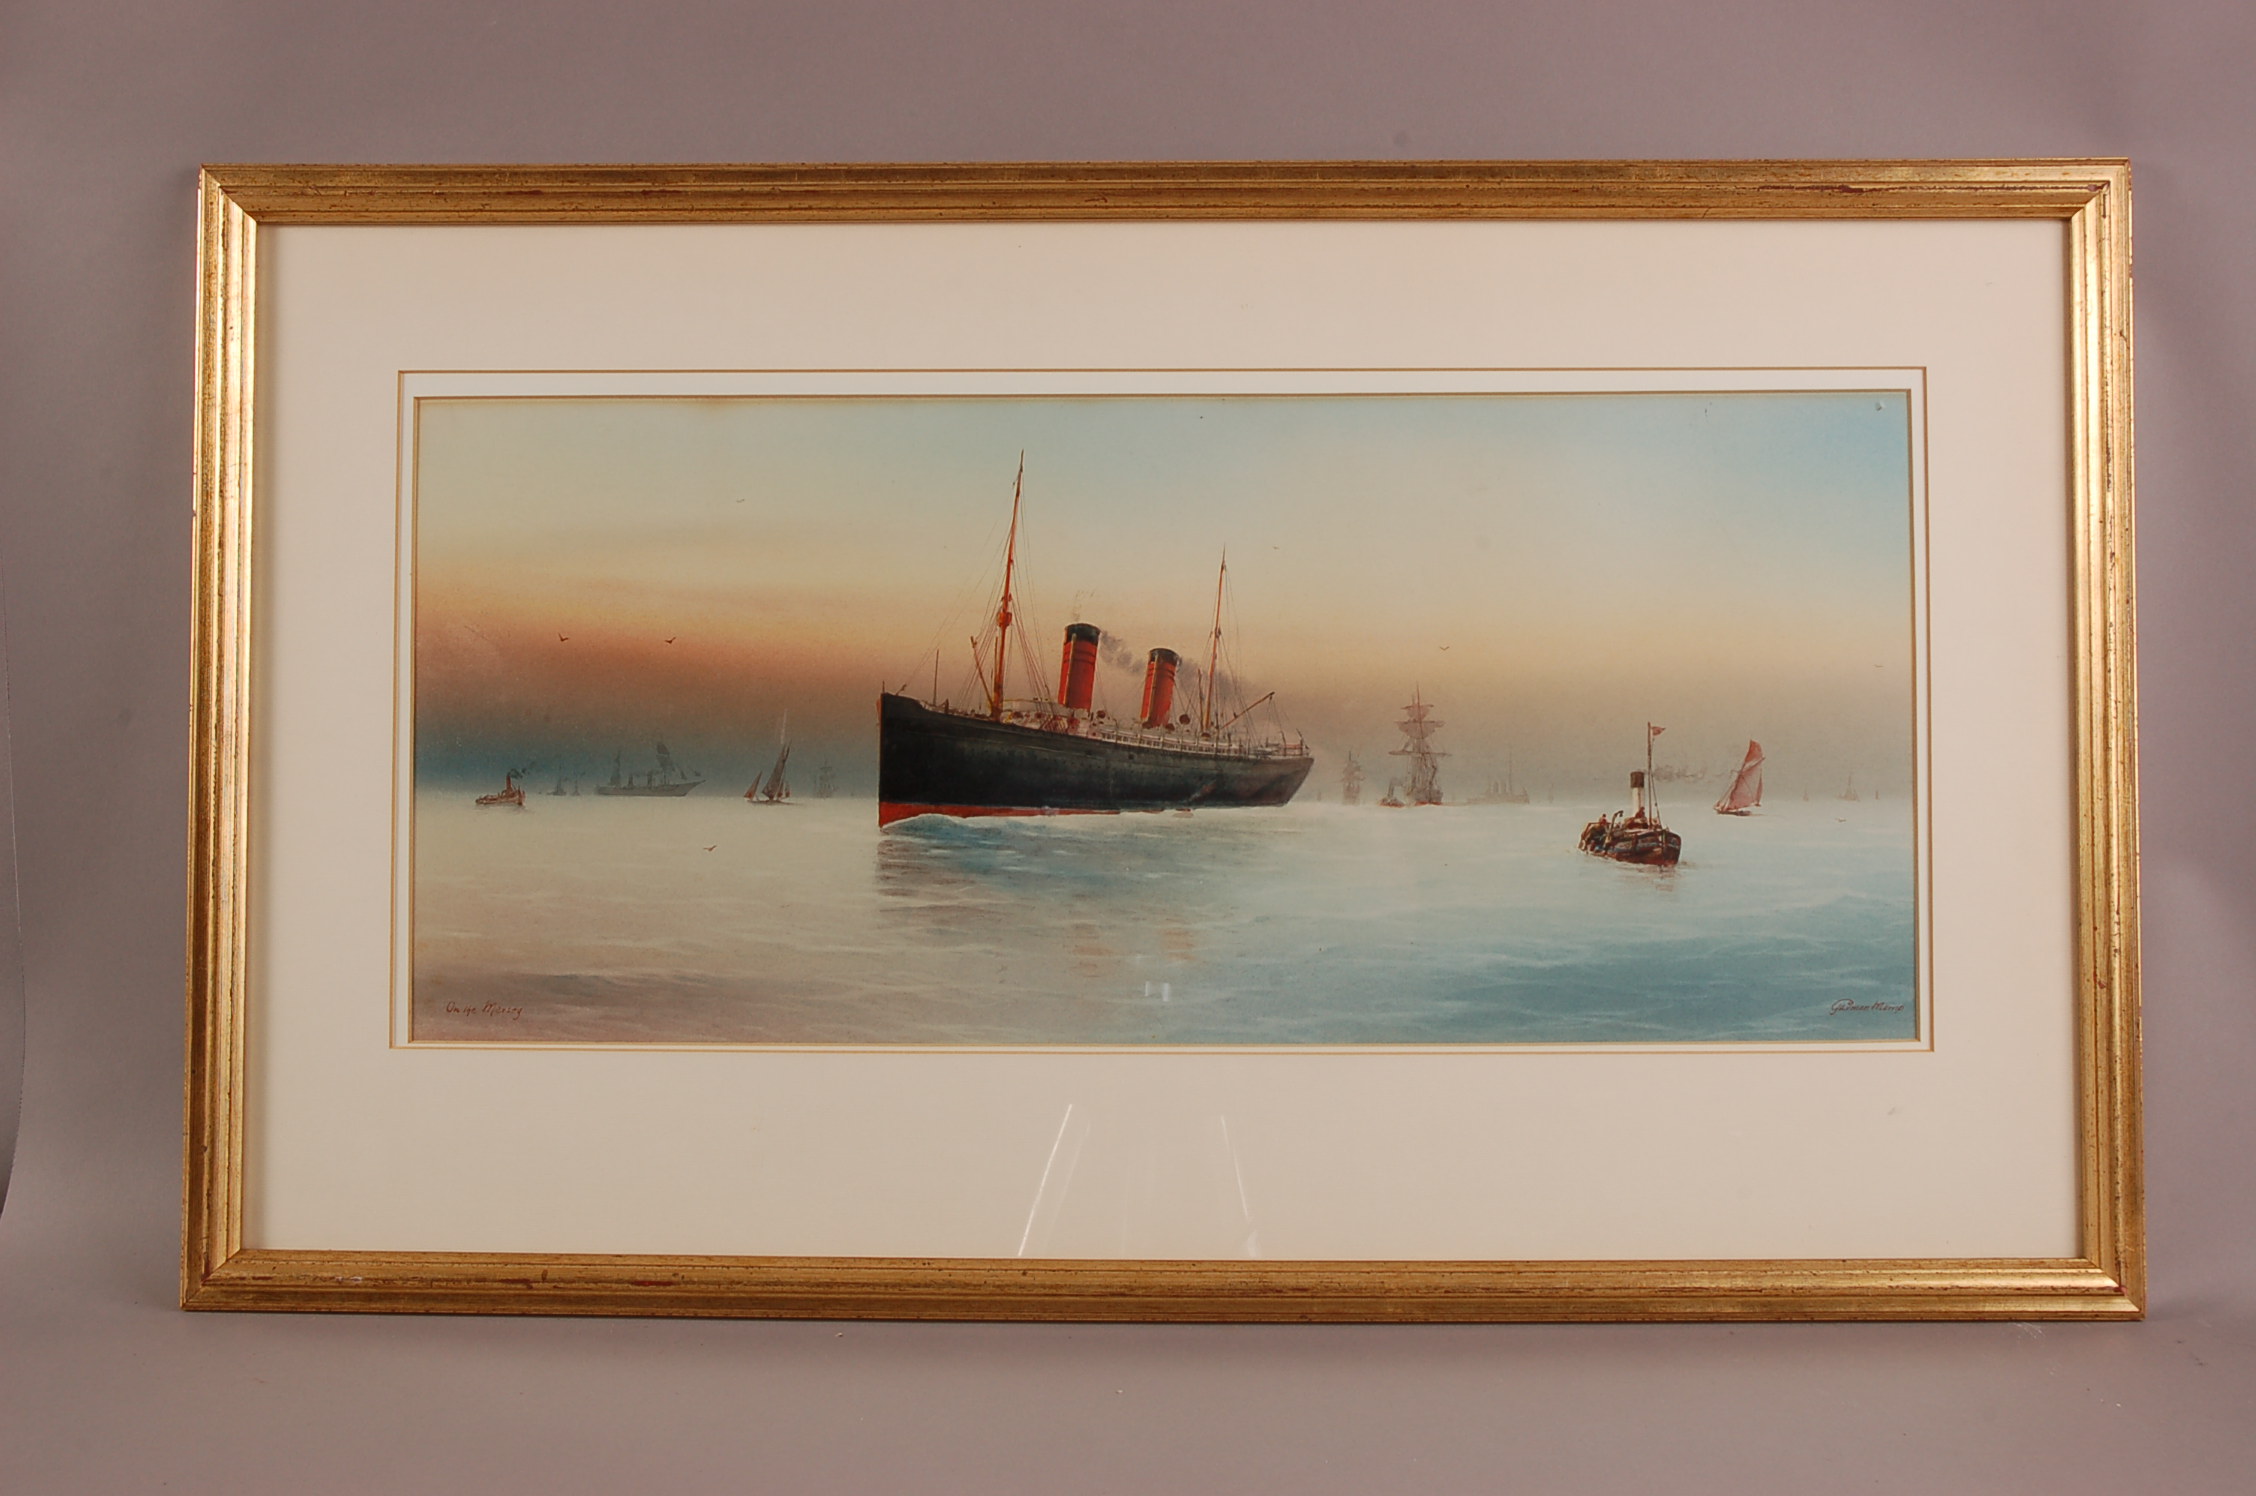 Garman Morris (19th/20th century), 28cm by 66cm, watercolour on paper, On The Mersey, signed and